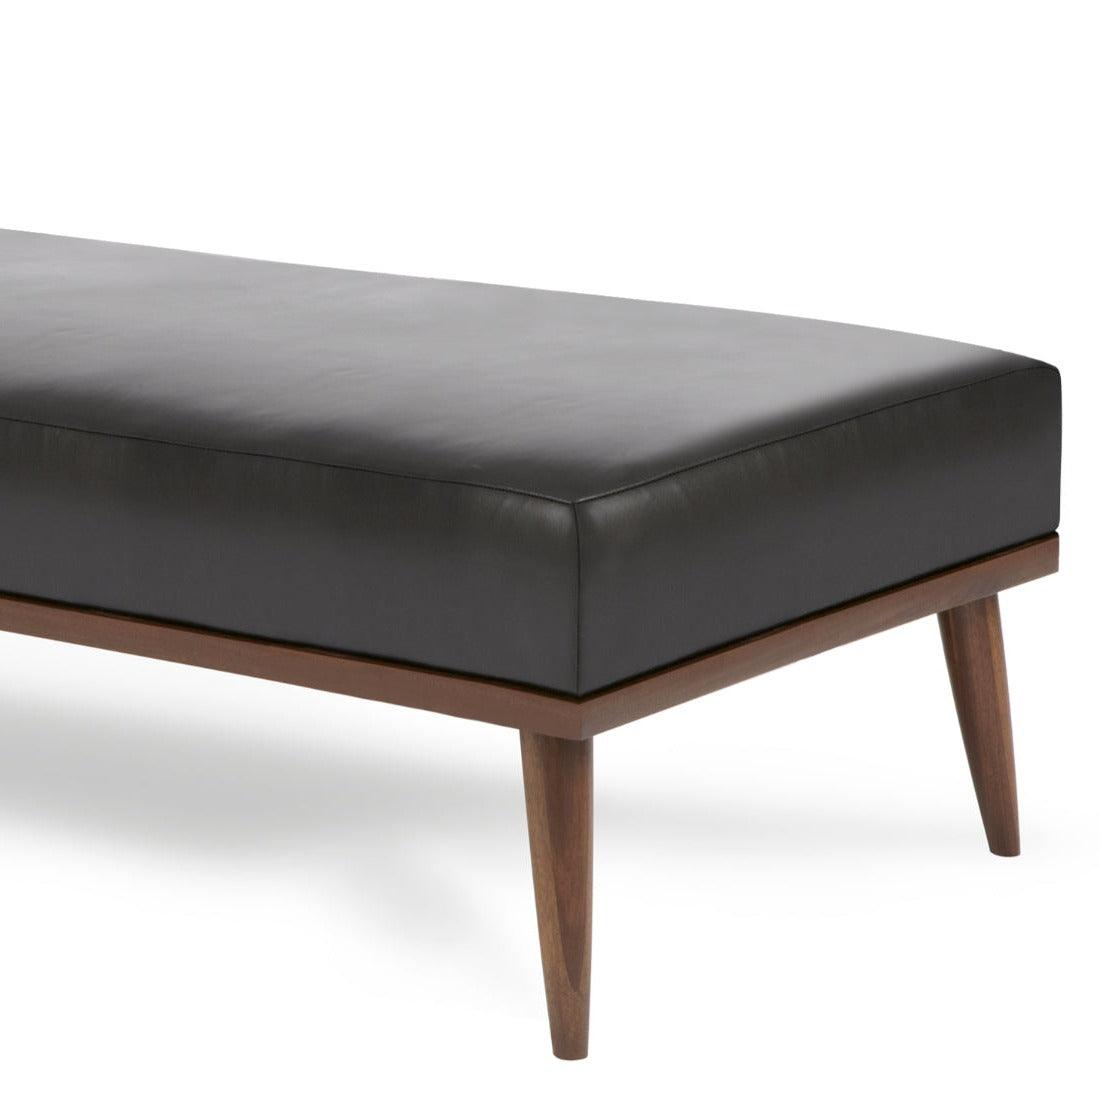 Beckett Bench Ottoman Coffee Table Top Grain Leather Made to Order - Uptown Sebastian